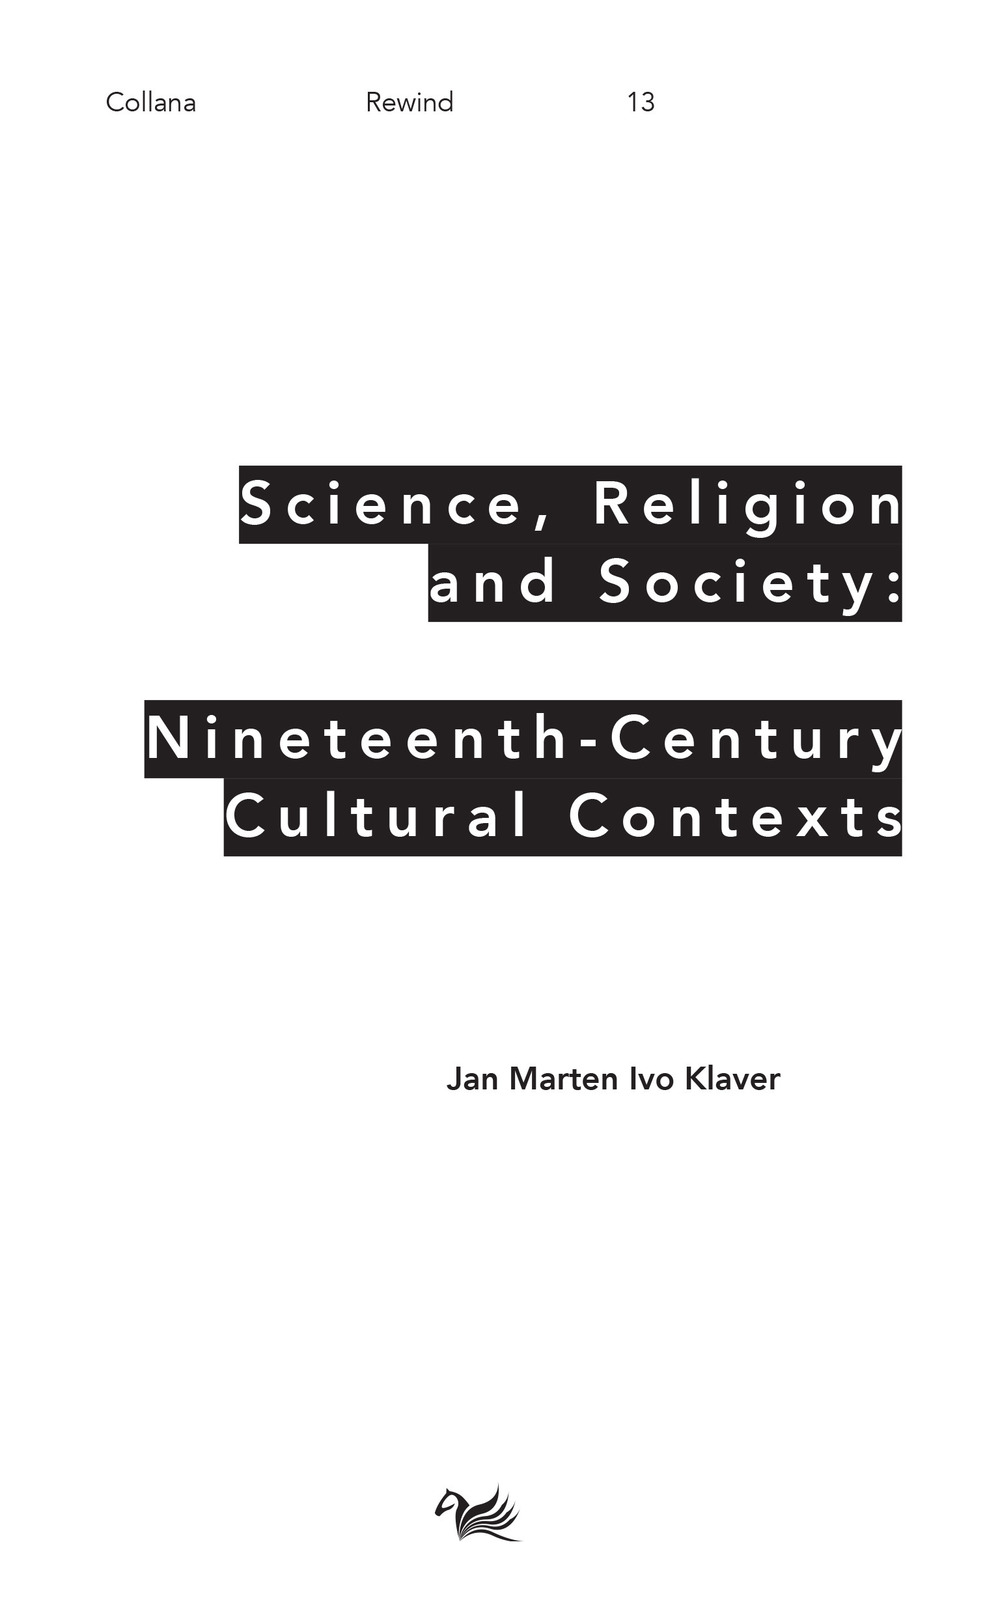 Science, religion and society: nineteenth-century culture cultural contexts